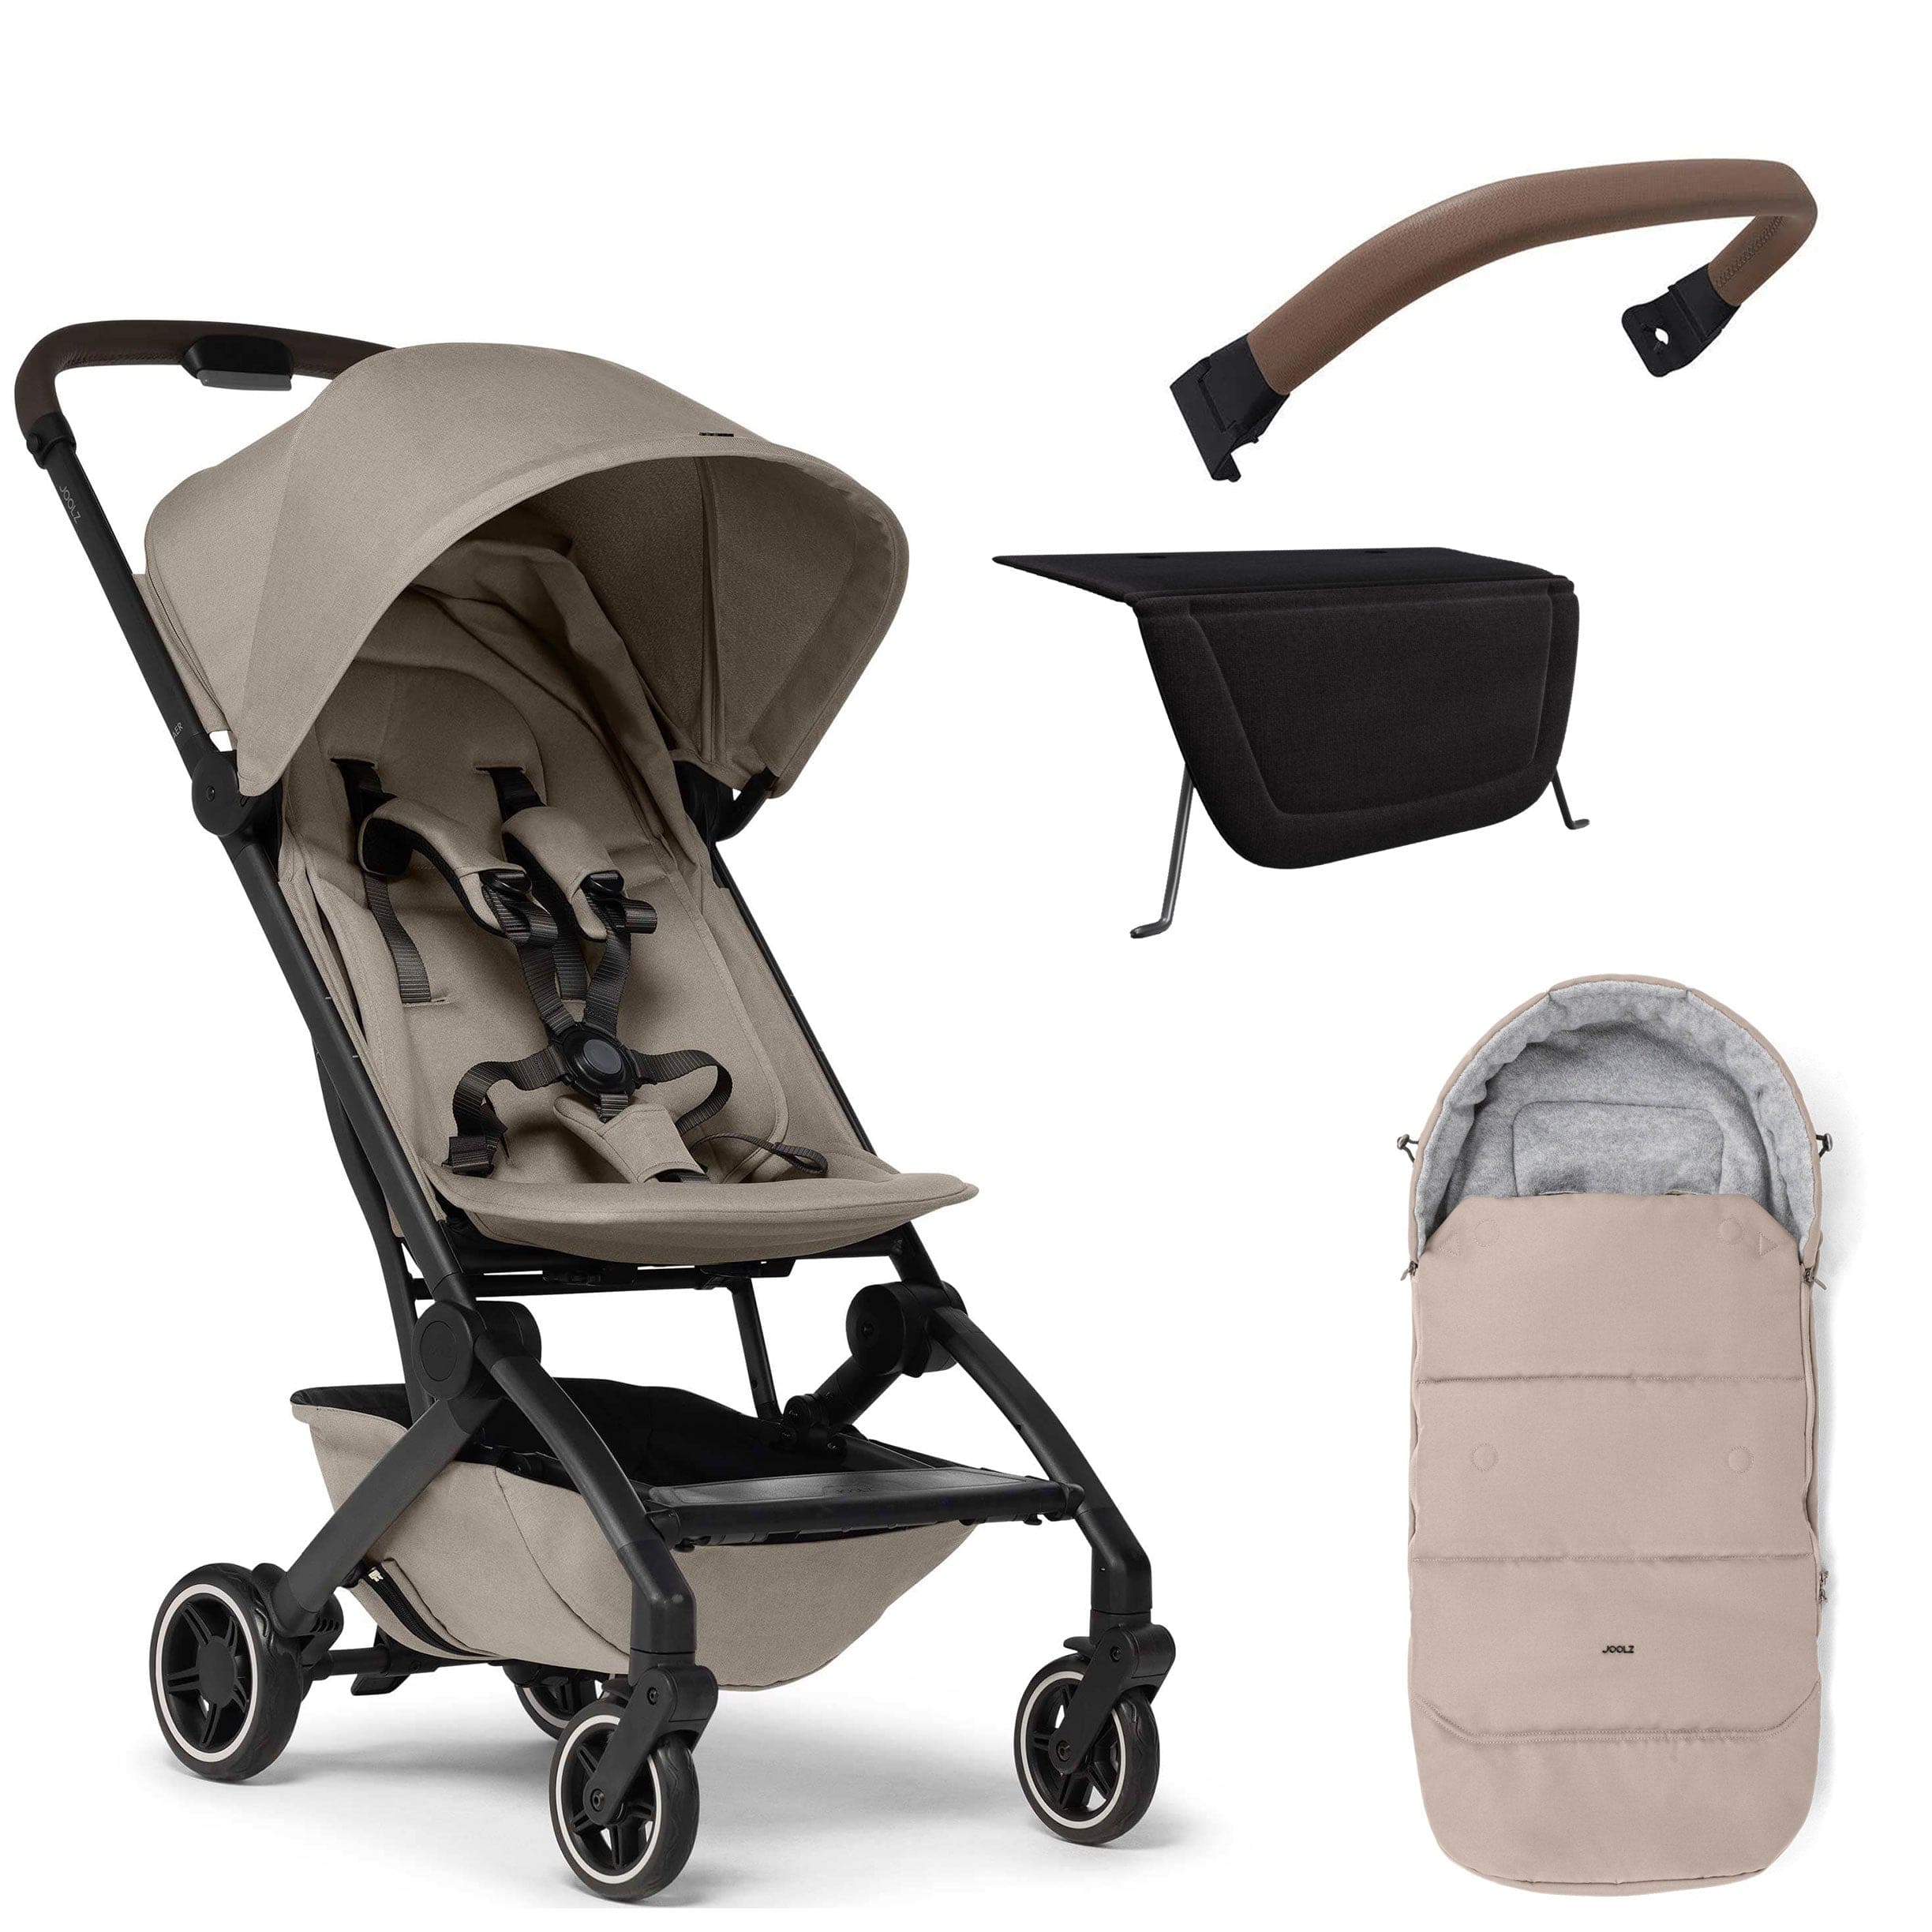 Joolz Aer+ Luxury Bundle in Sandy Taupe Pushchairs & Buggies 15455-SDT 8715688085004